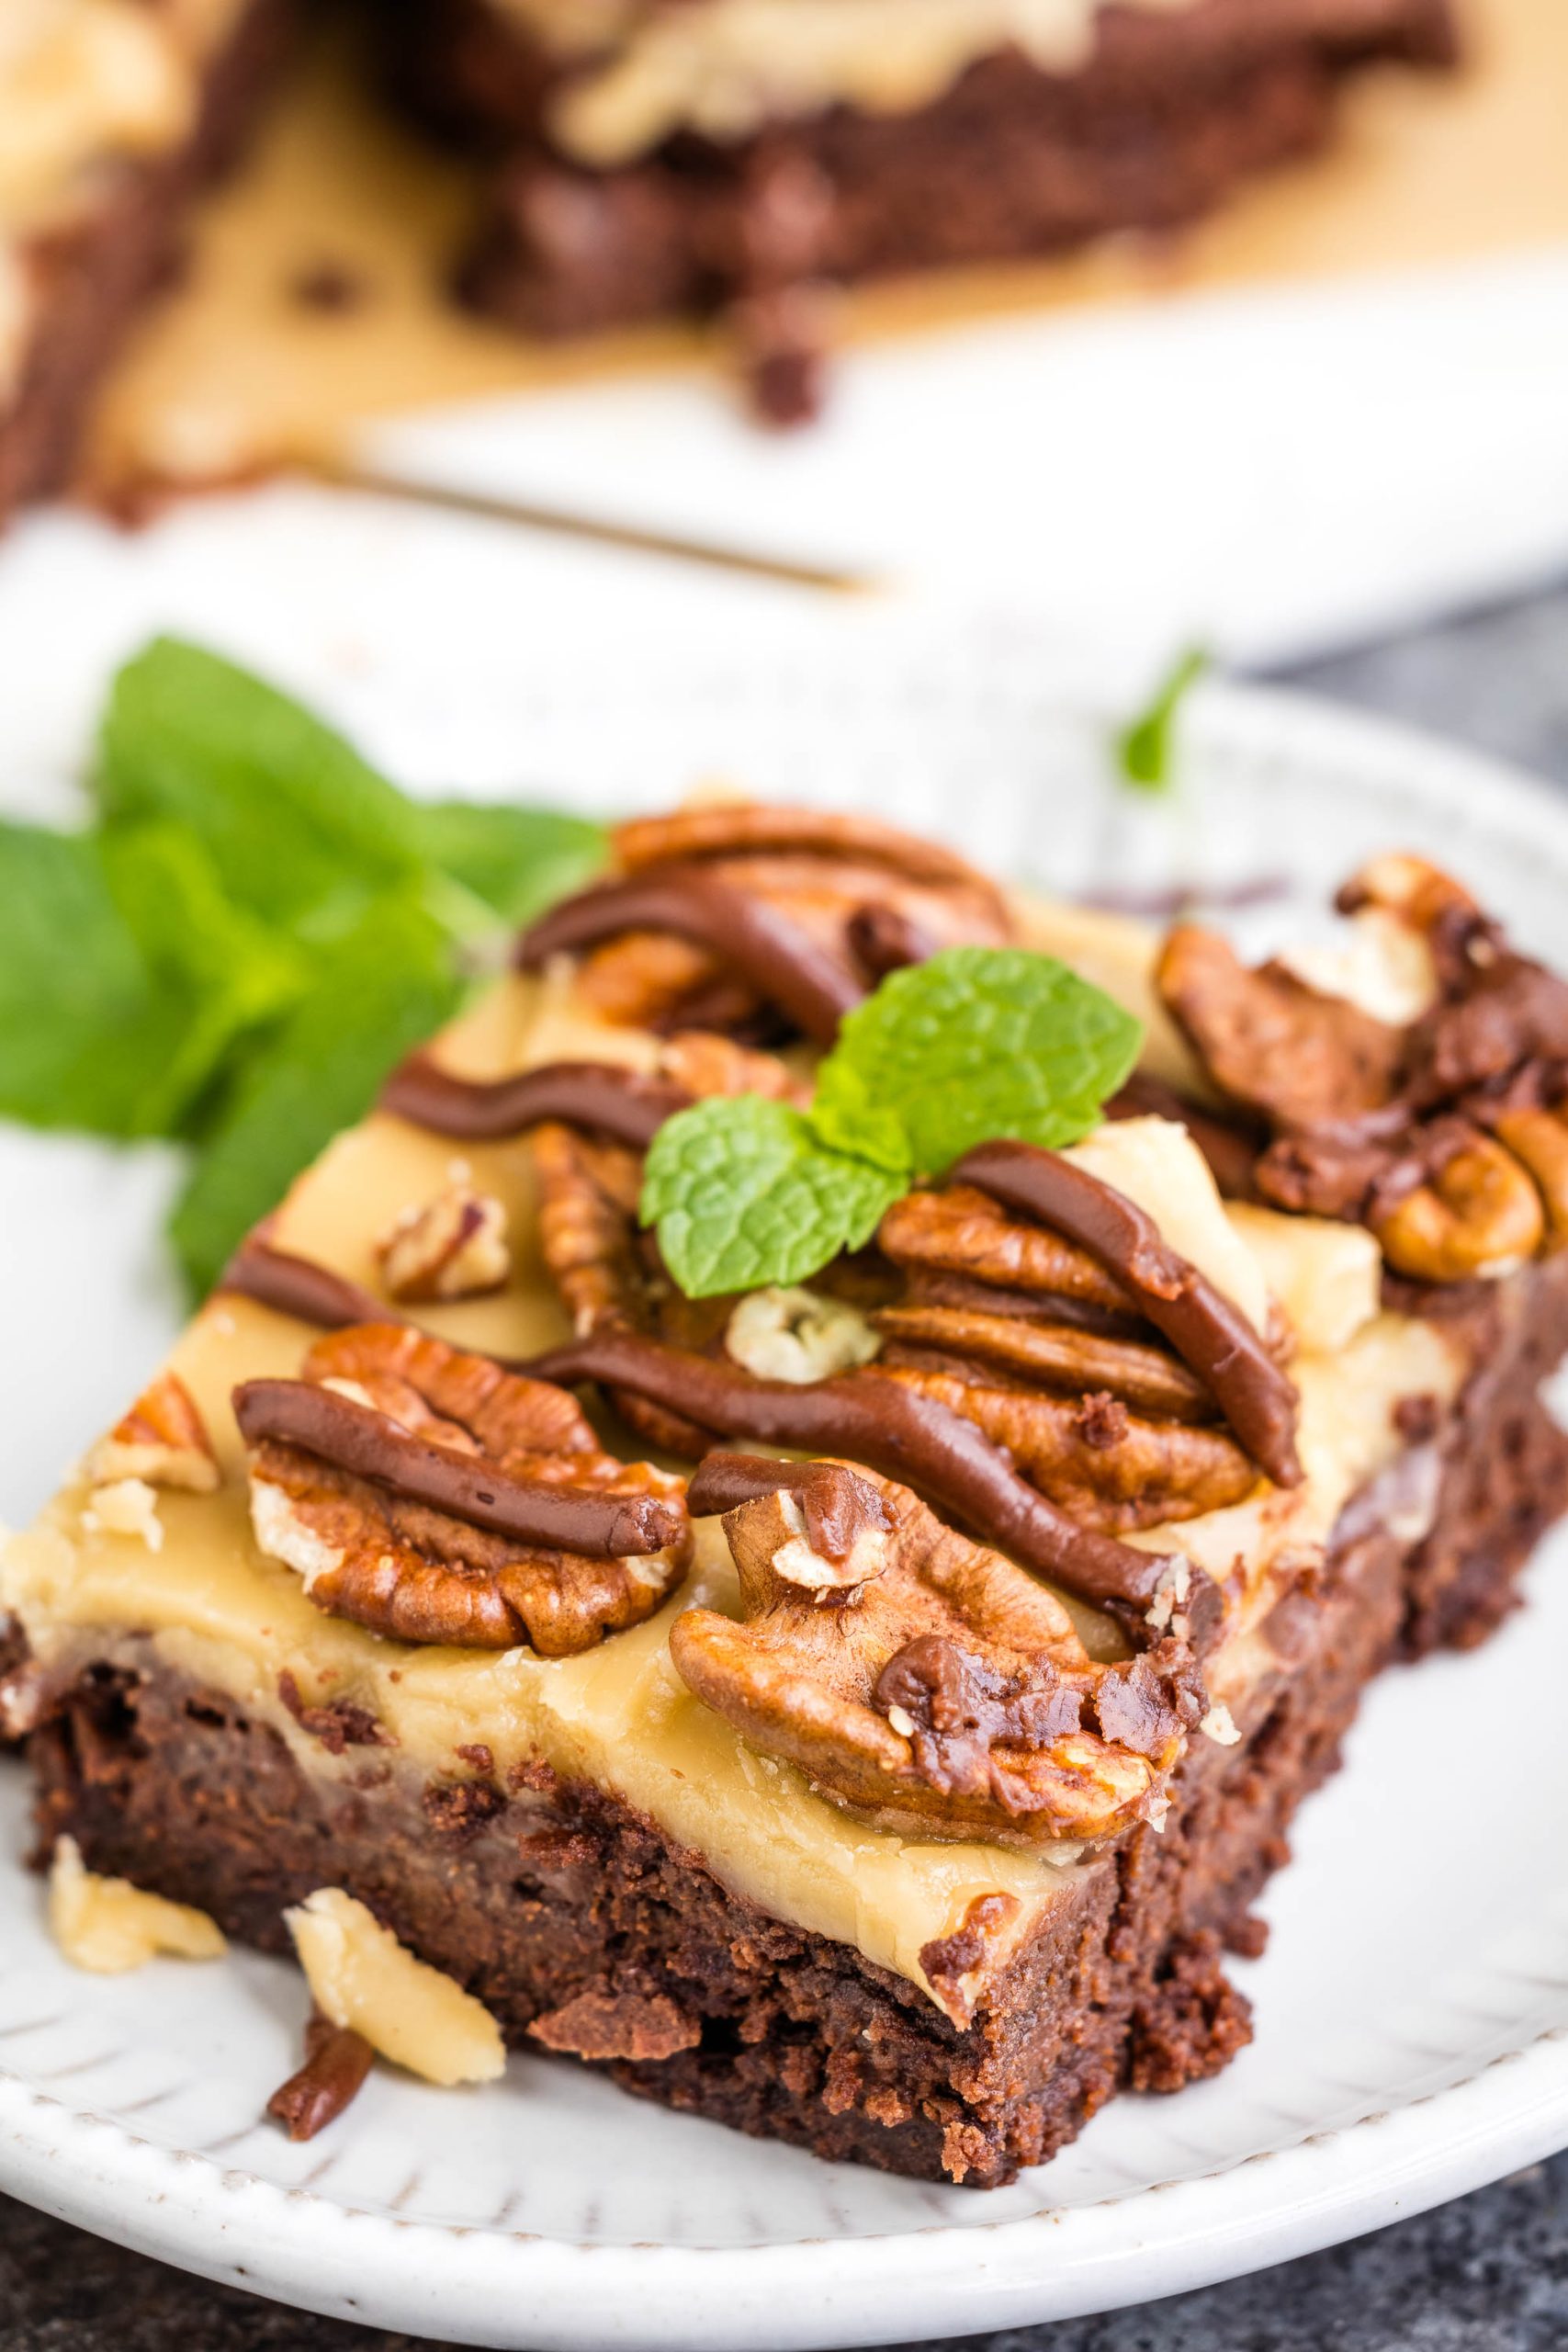 A piece of chocolate brownie with pecans and mint on a plate.